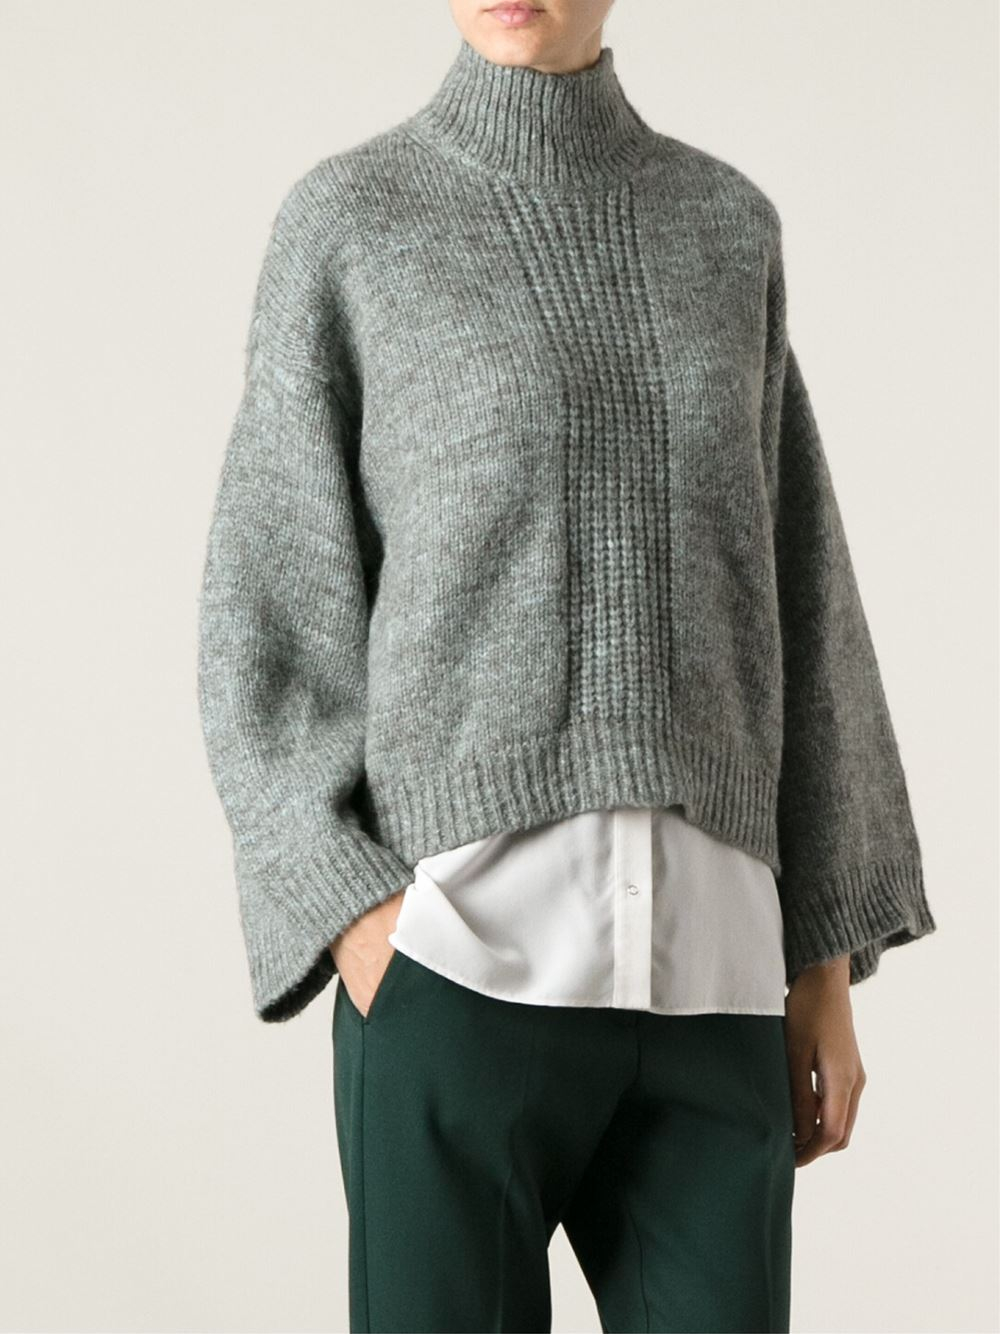 Lyst - 3.1 phillip lim Cropped Boxy Sweater in Gray